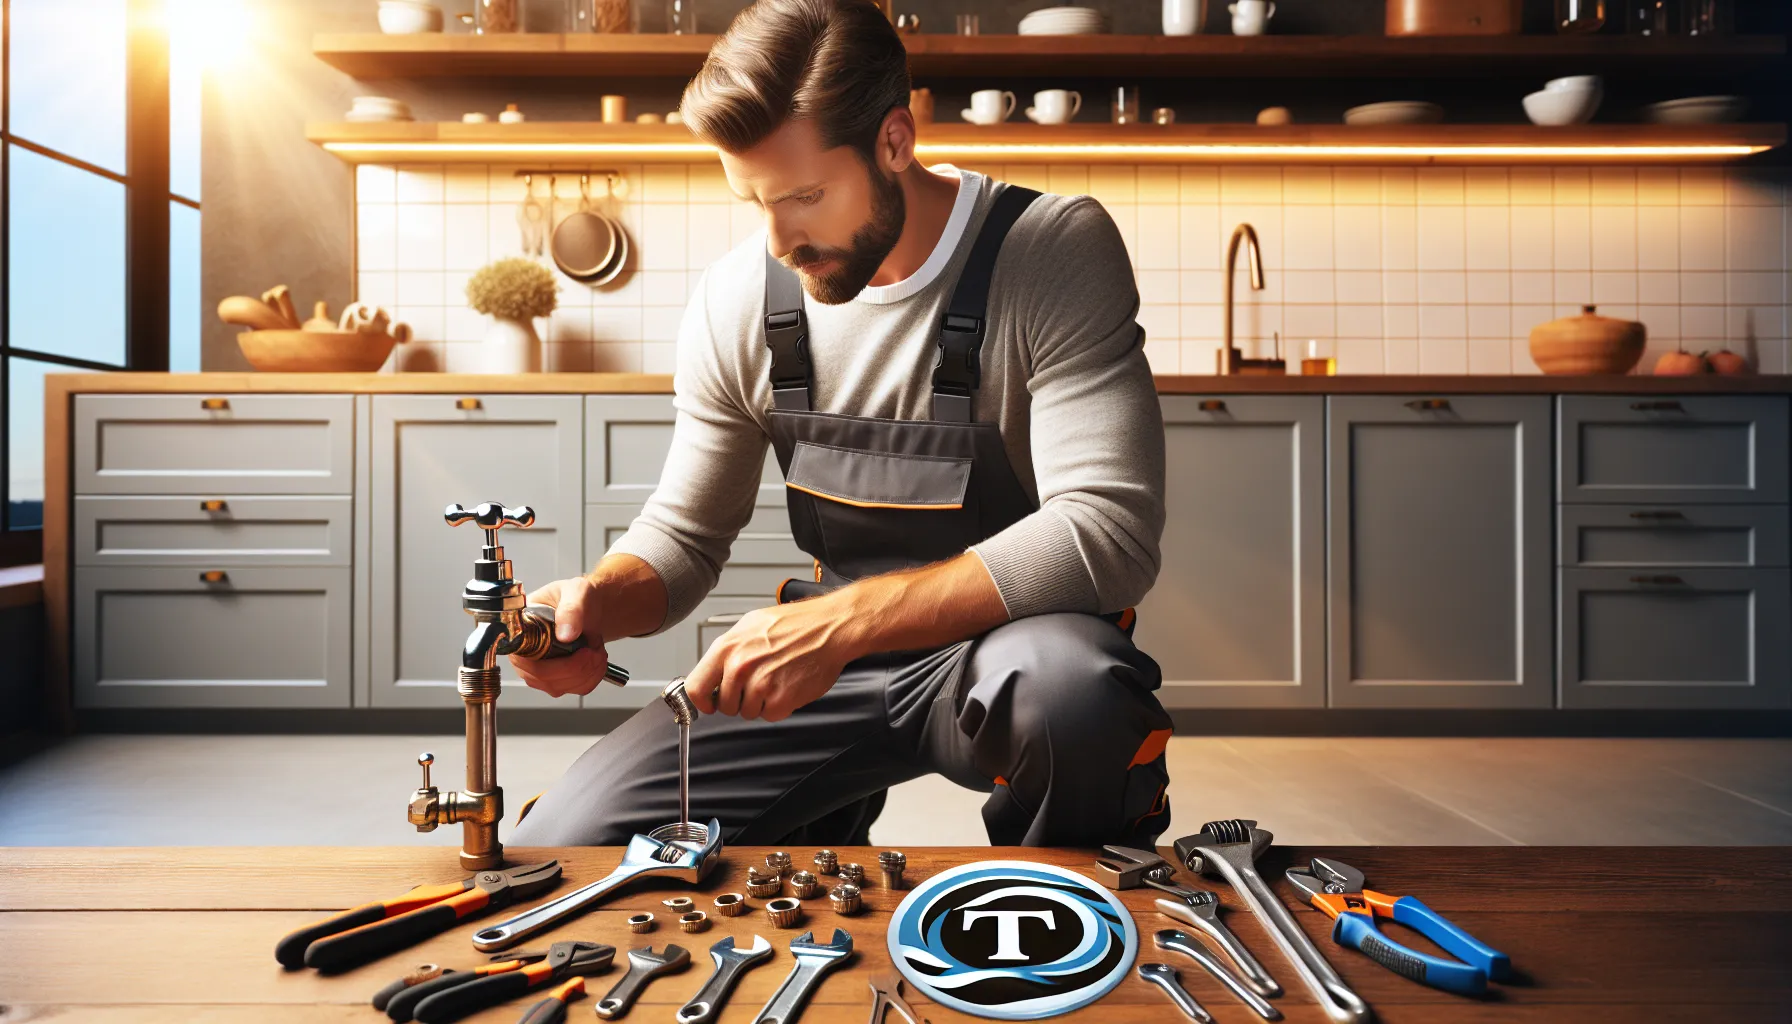 Why Tuckertown is Your Top Choice for Tucker Plumbing Services